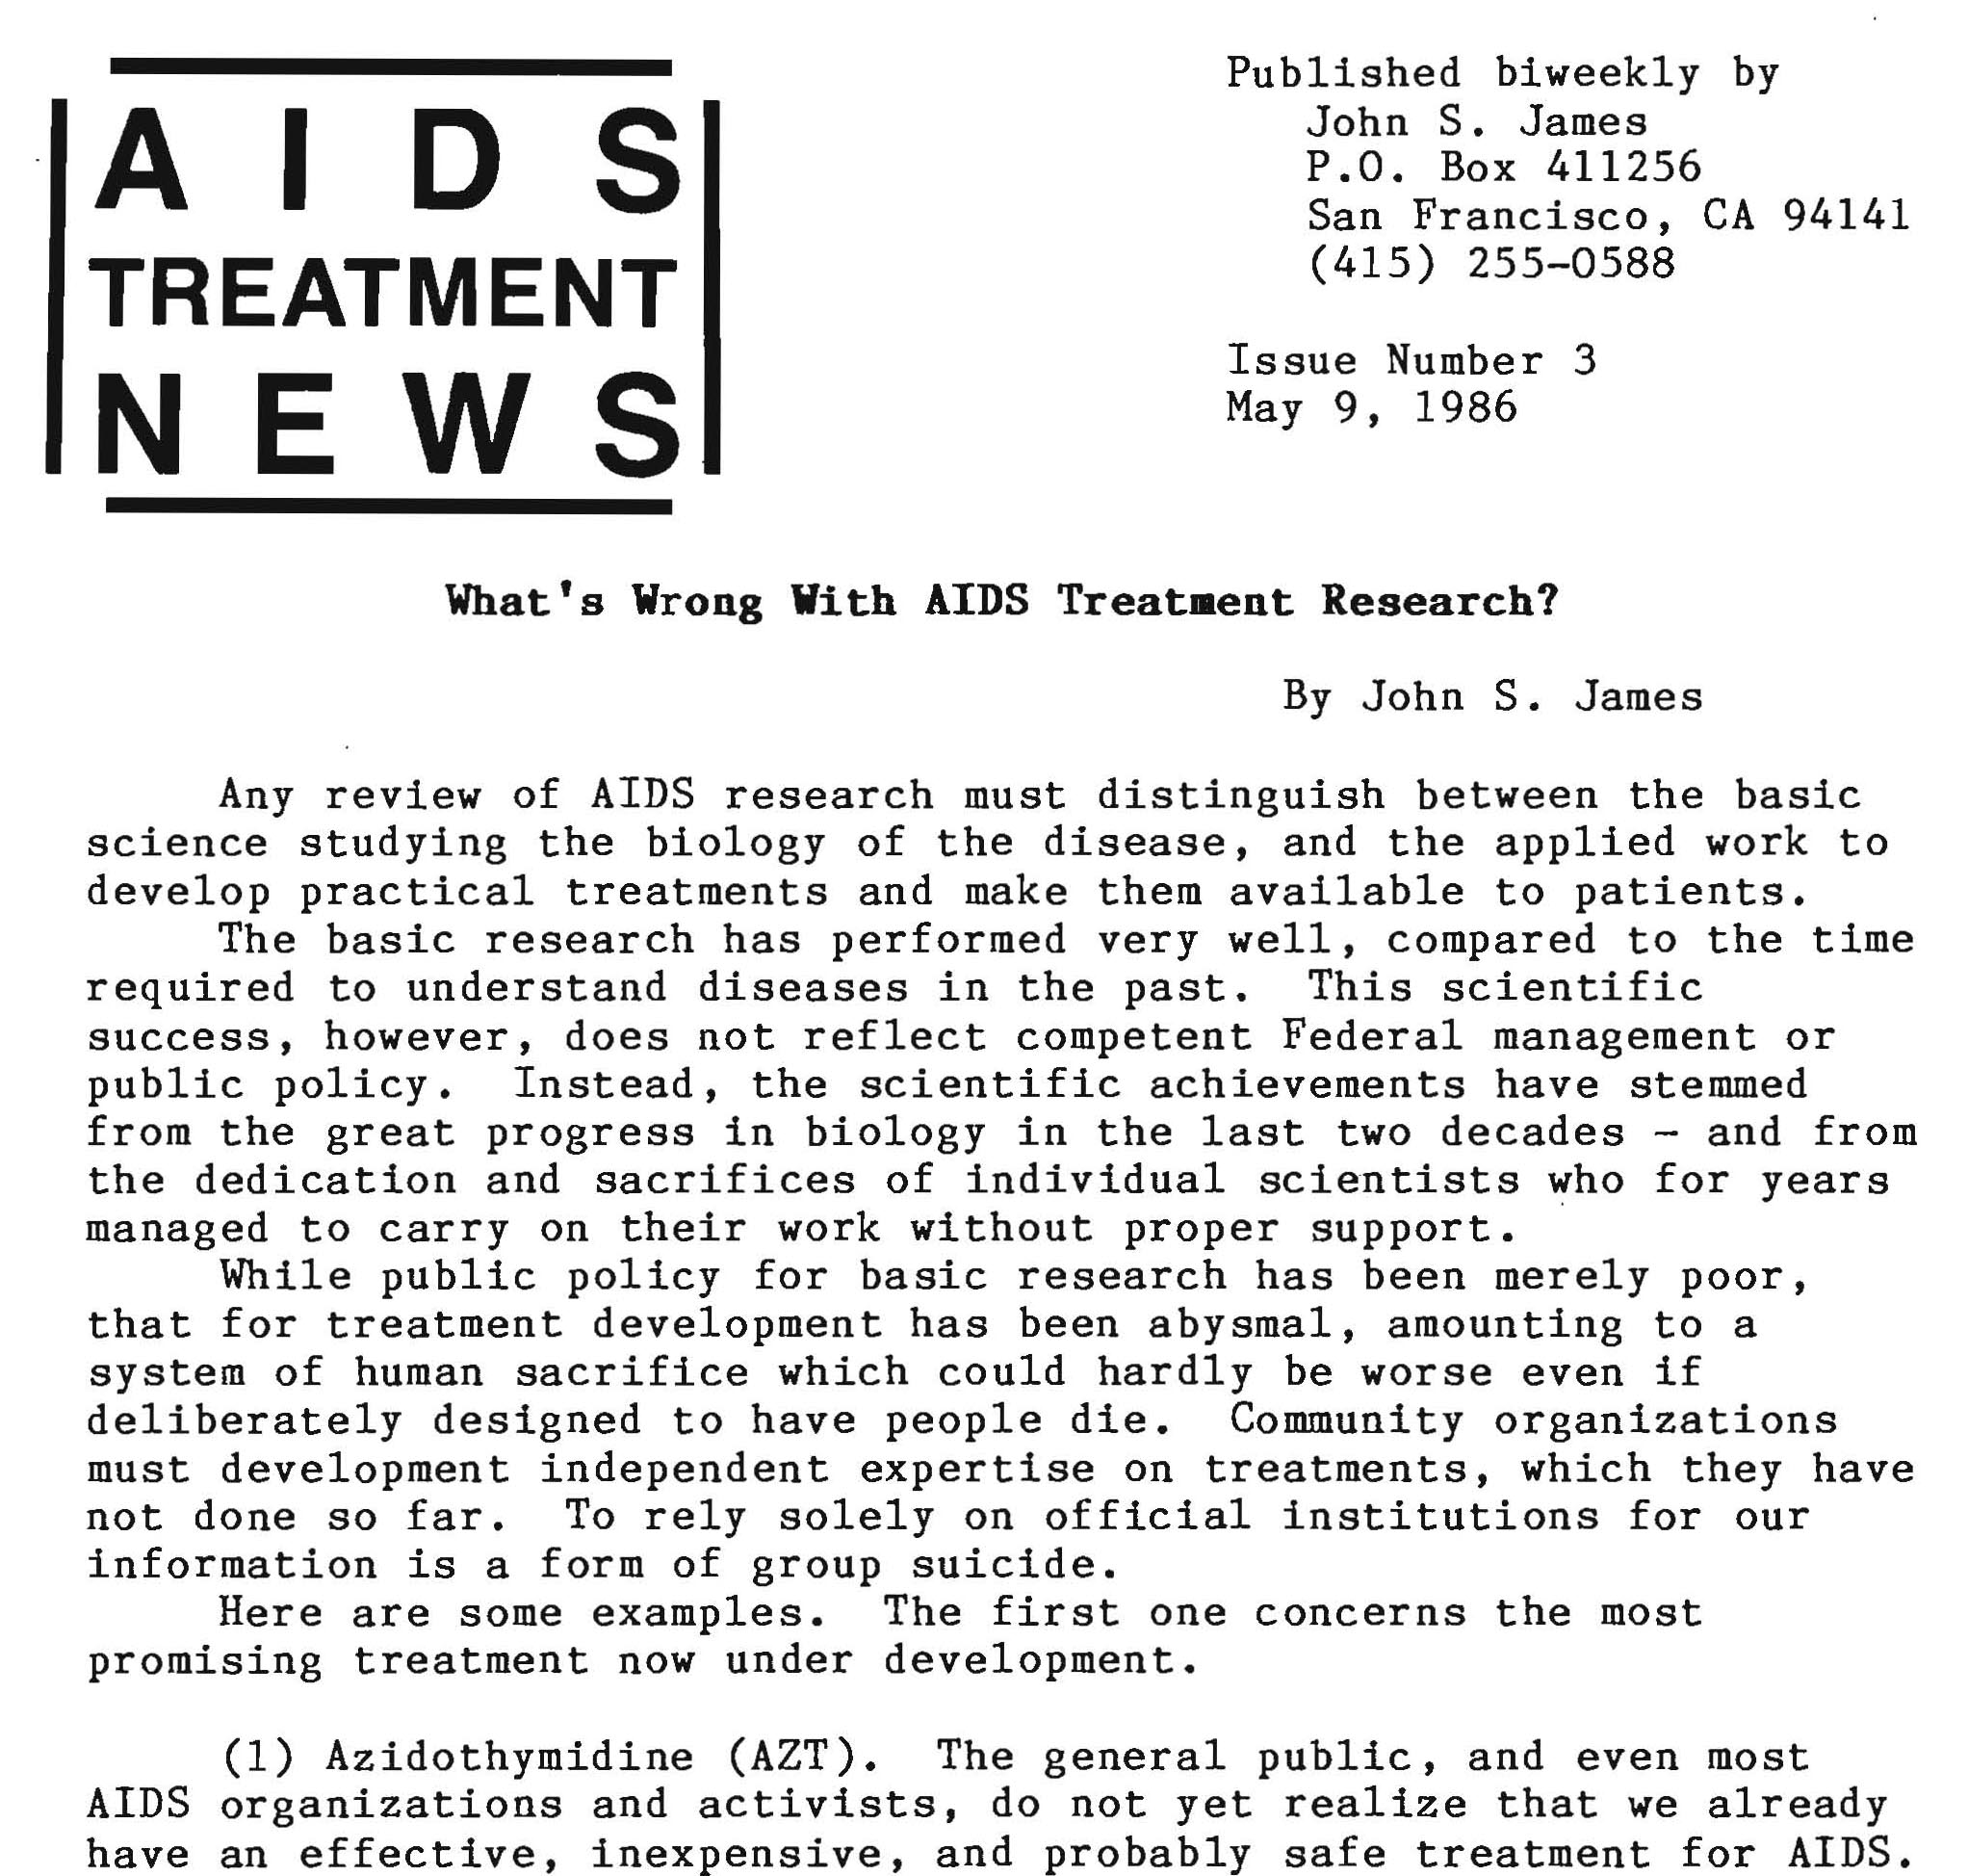 Title page of AIDS Treatment News, Issue #3, May 9, 1986